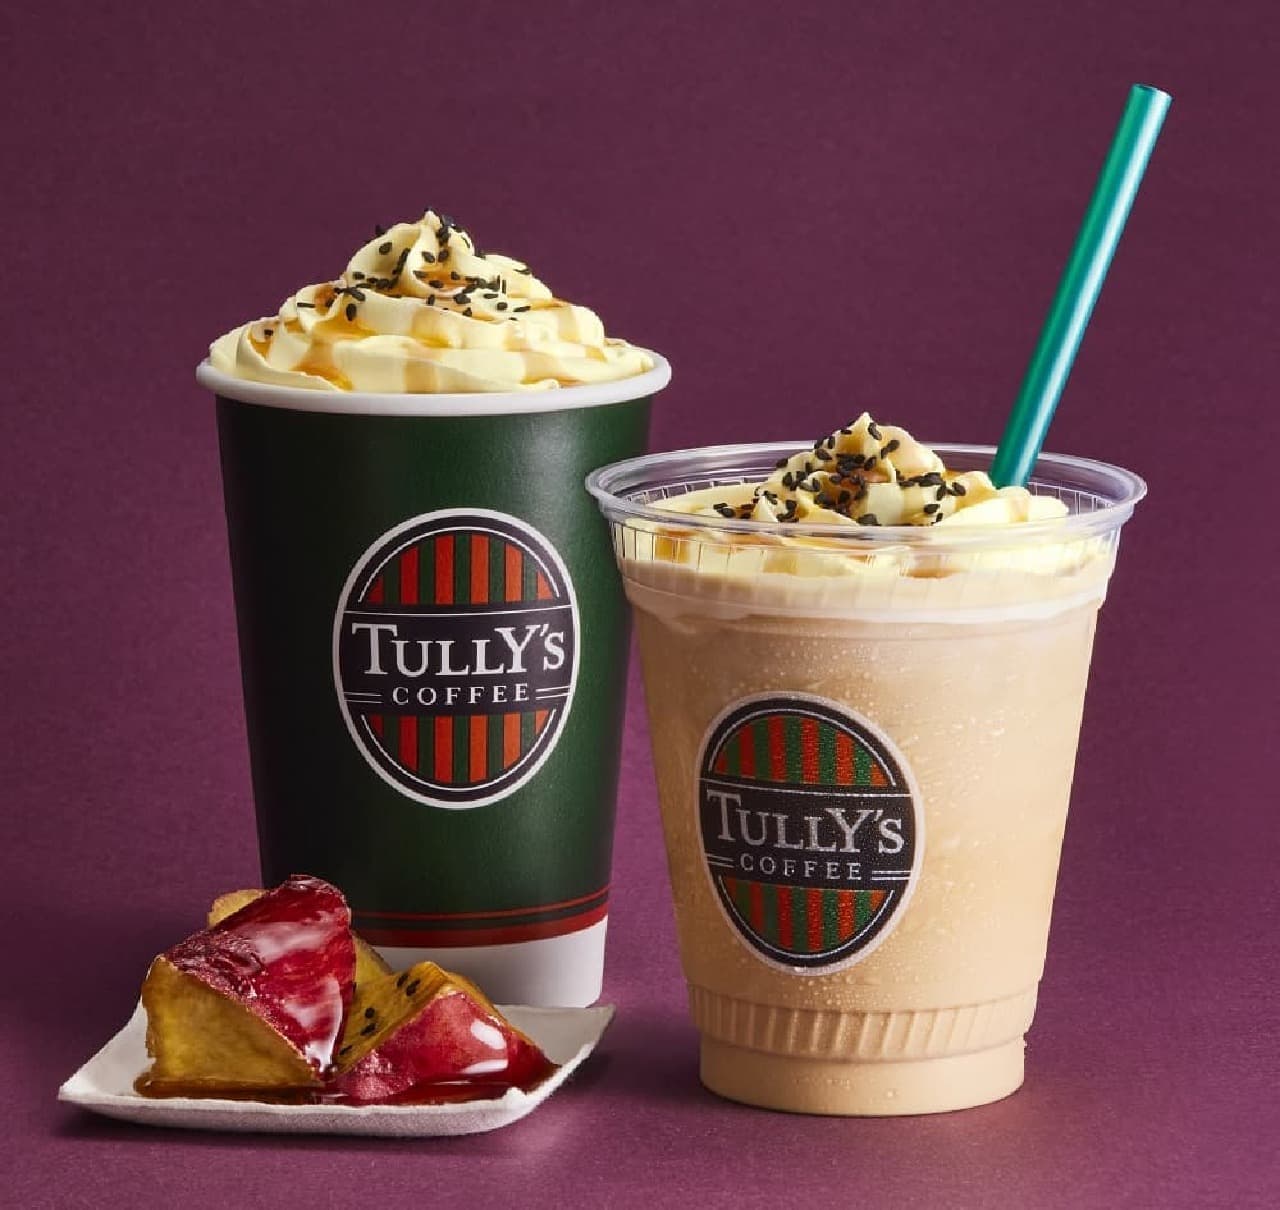 Tully's "Dusty OIMO Latte